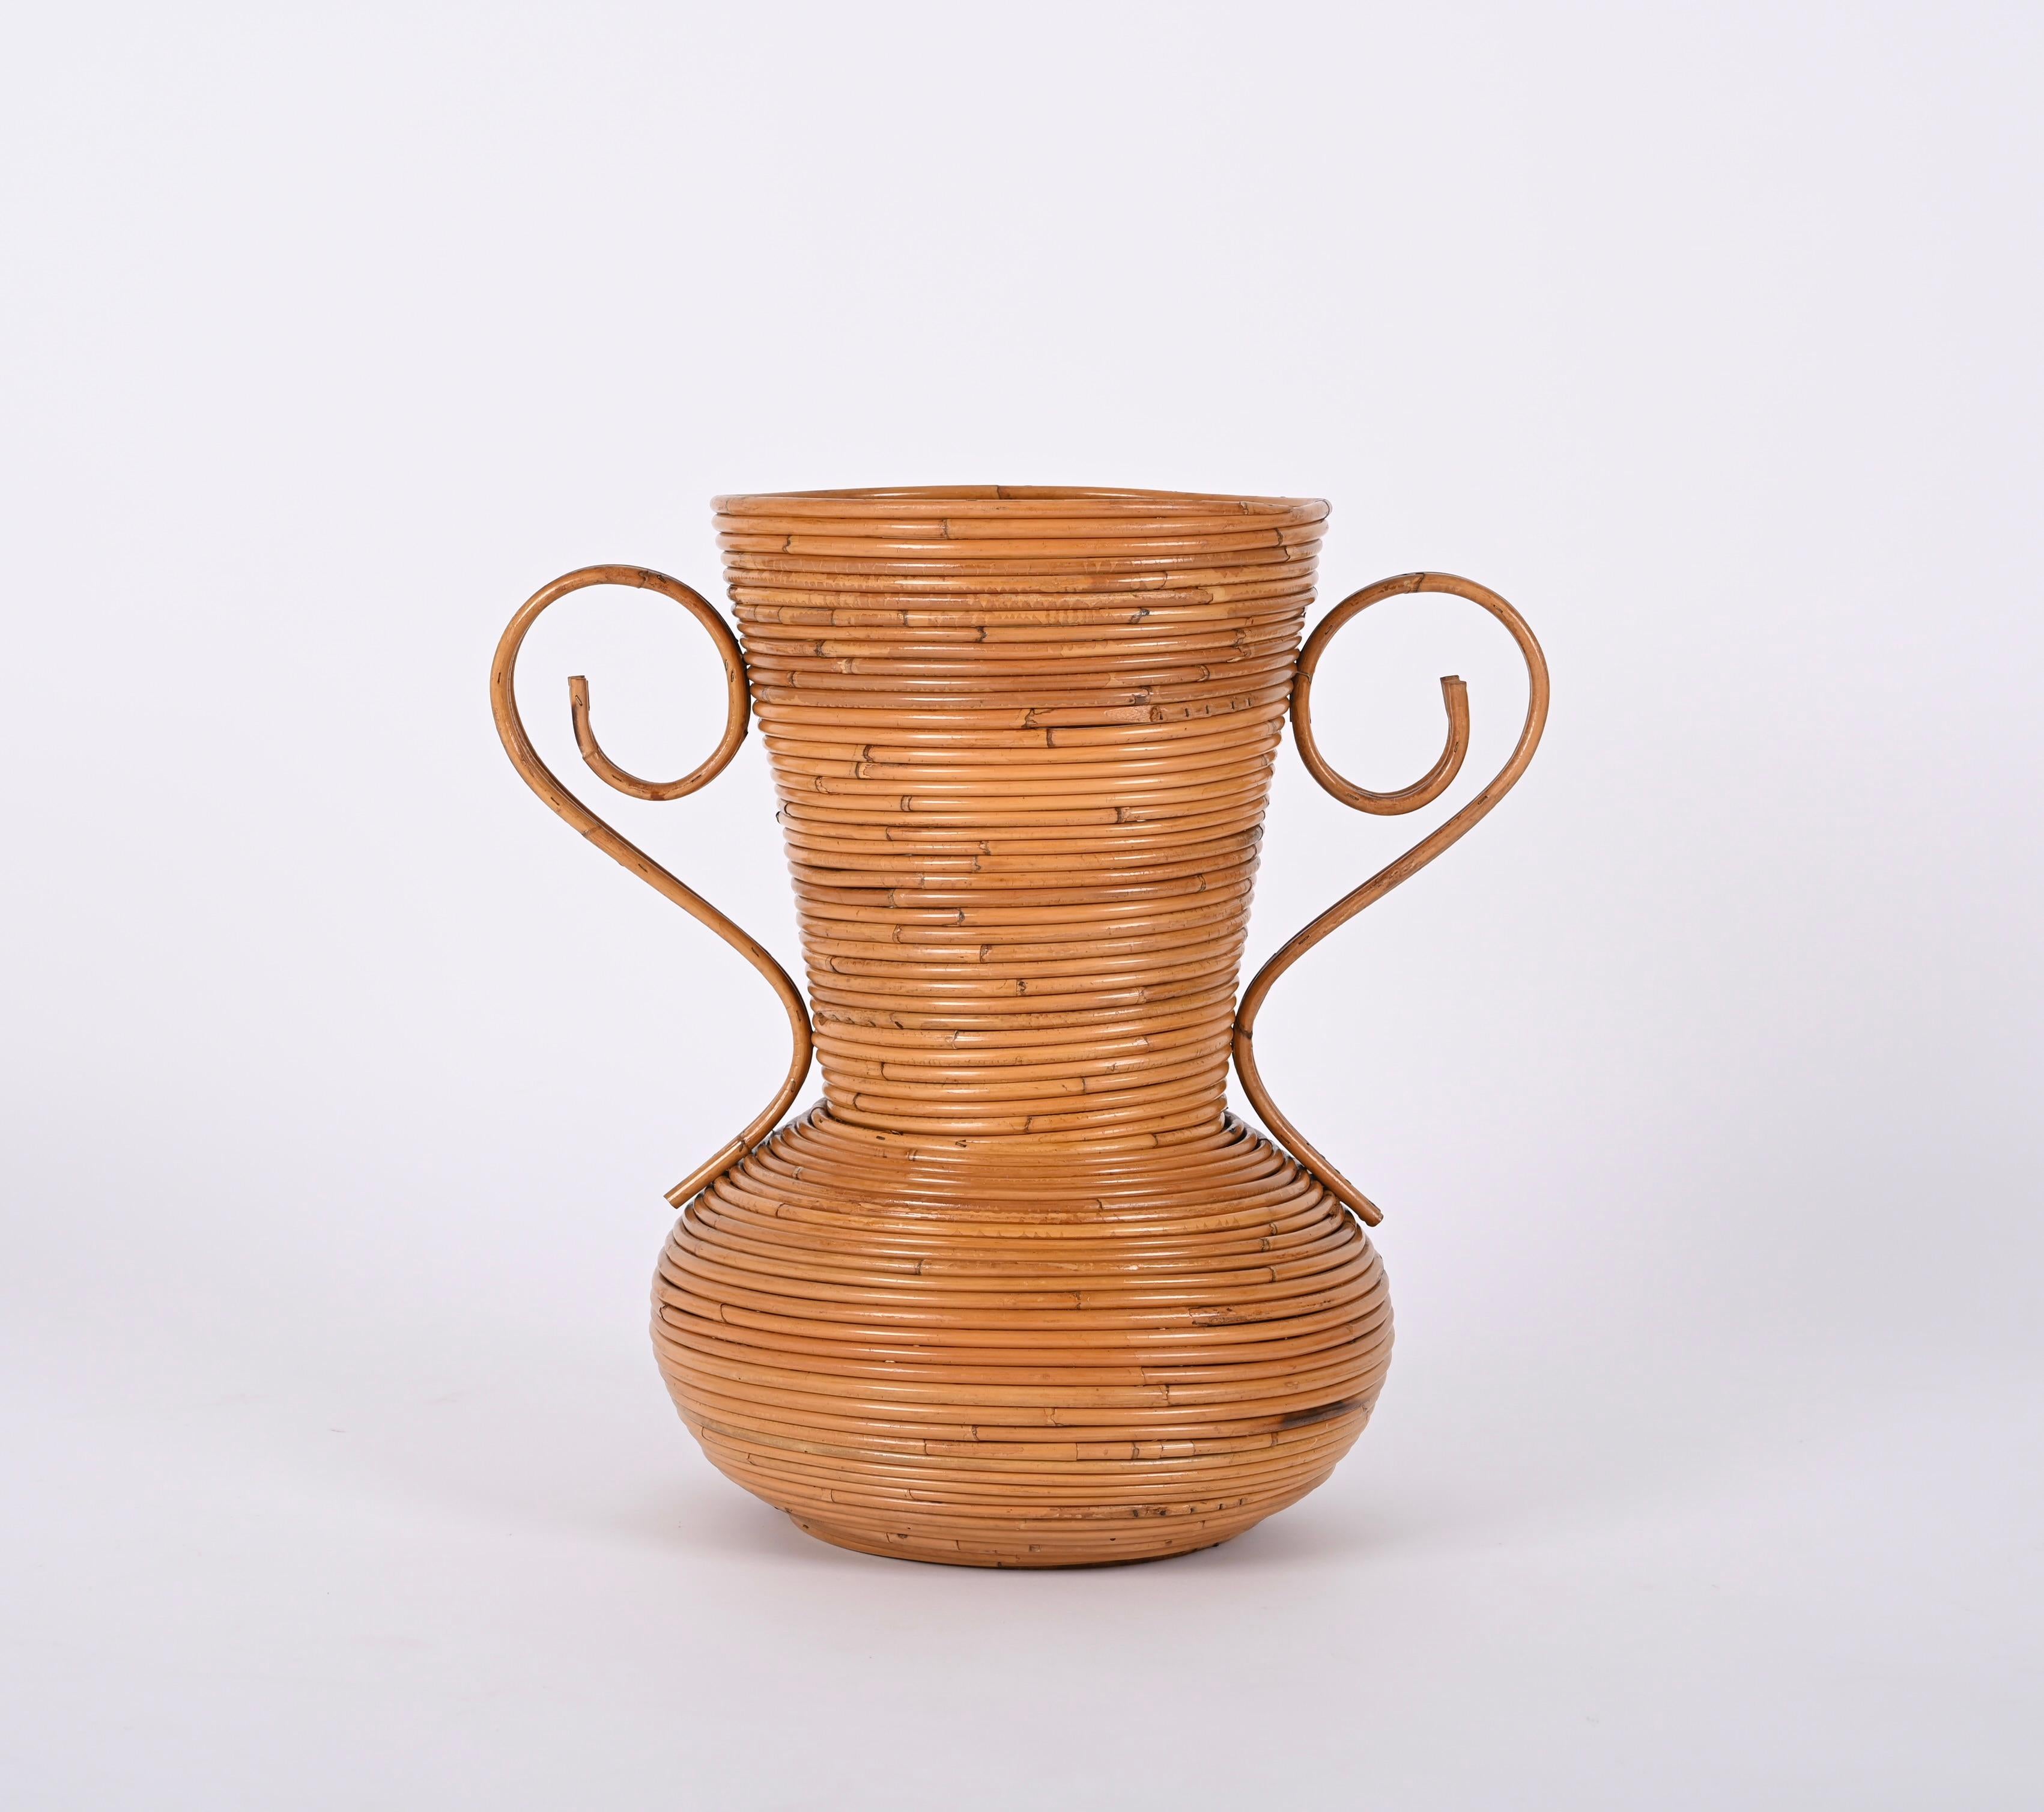 Mid-Century Modern Midcentury Bamboo and Rattan Decorative Vase, by Vivai del Sud, Italy, 1970s For Sale